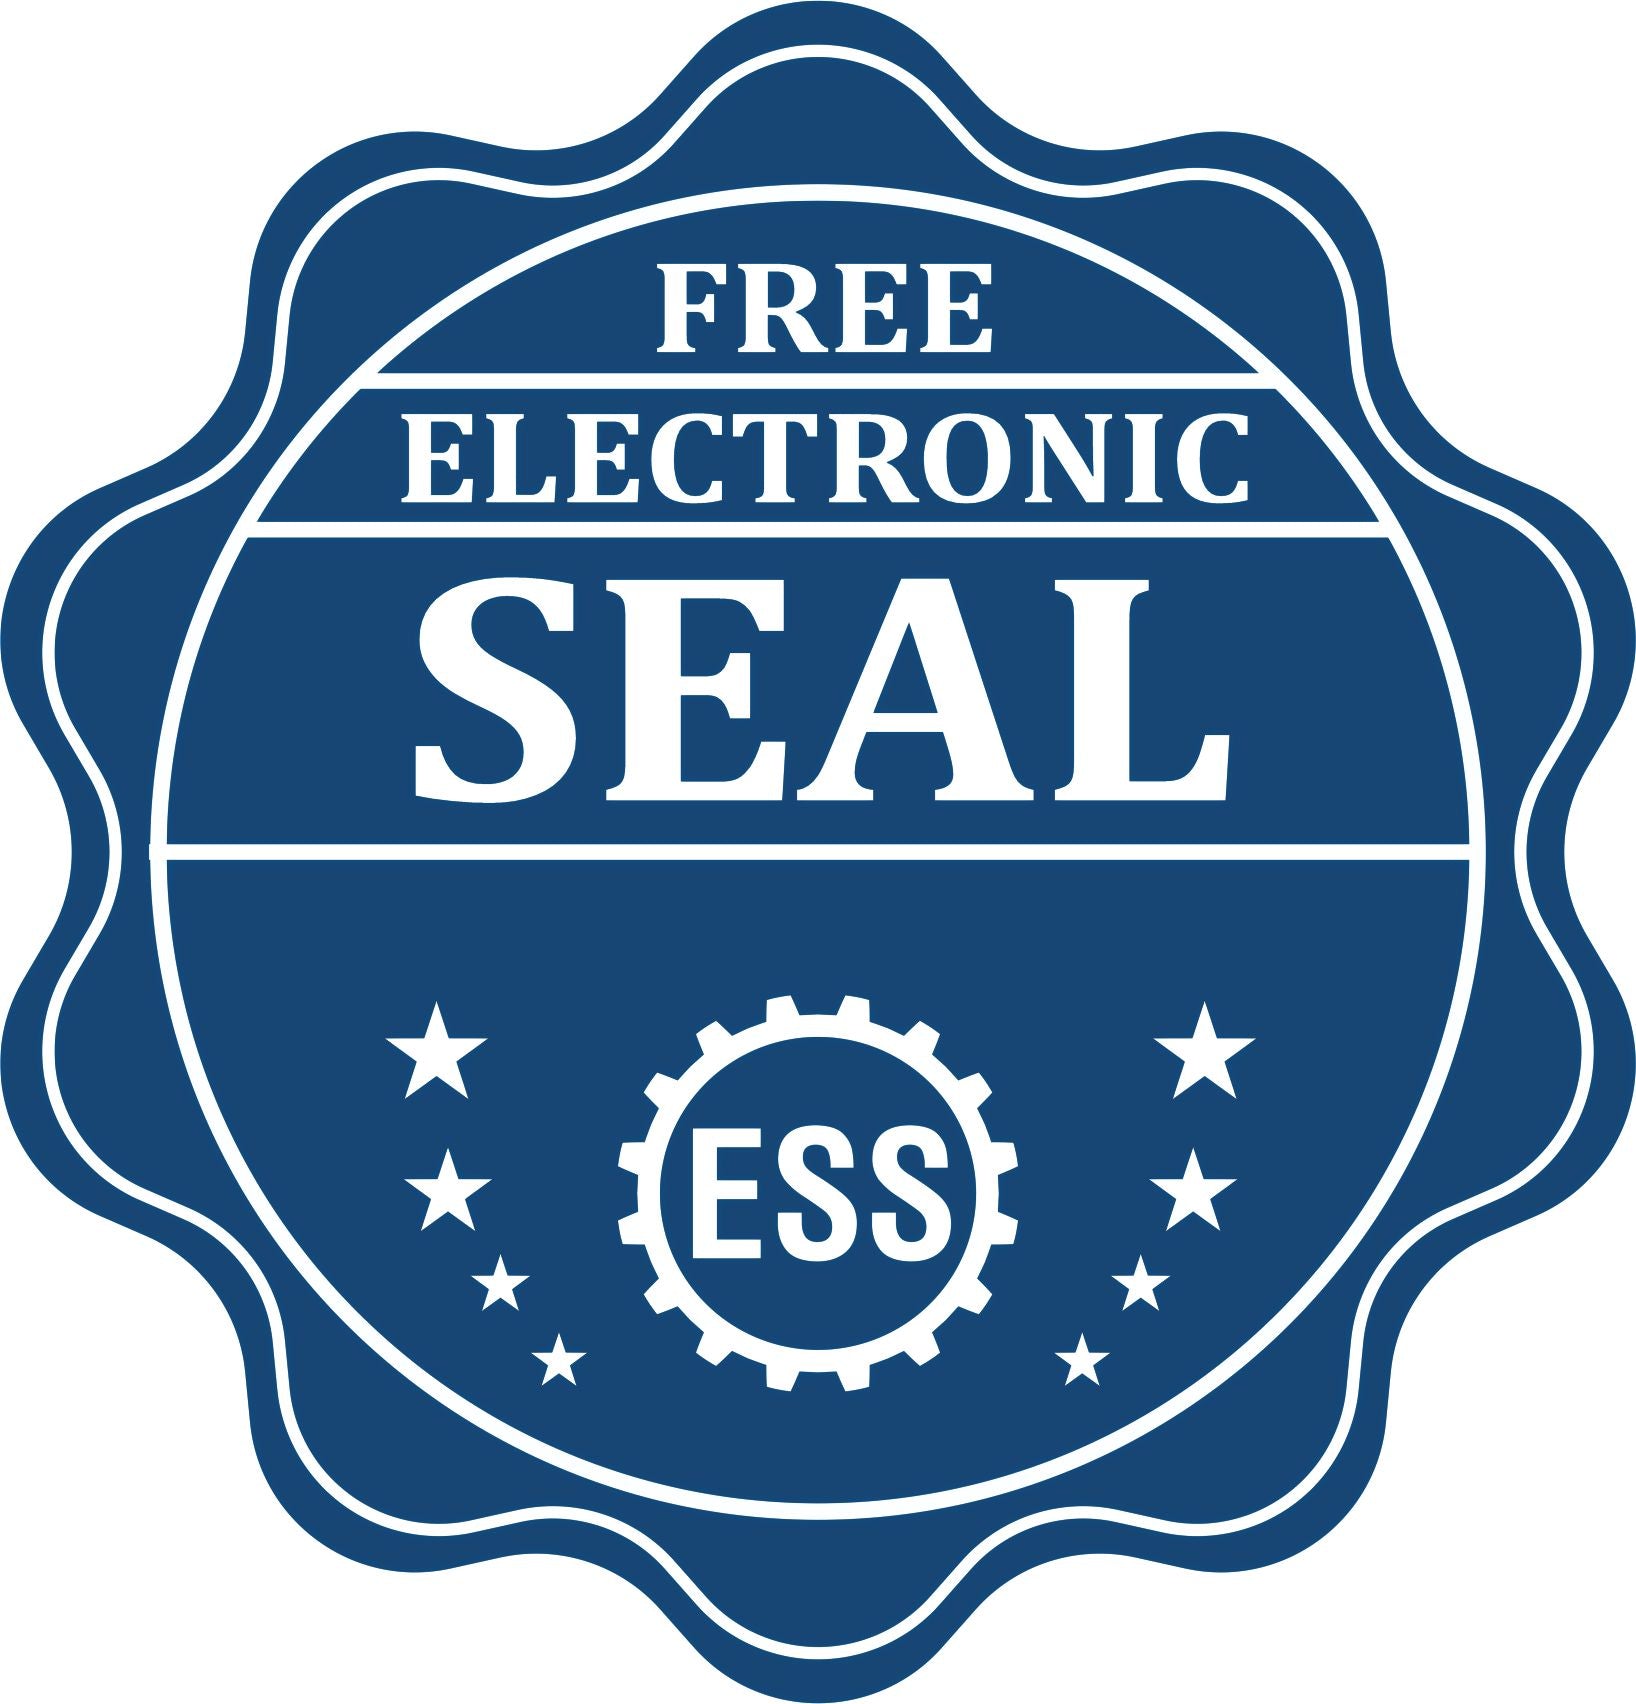 A badge showing a free electronic seal for the Gift North Dakota Landscape Architect Seal with stars and the ESS gear on the emblem.